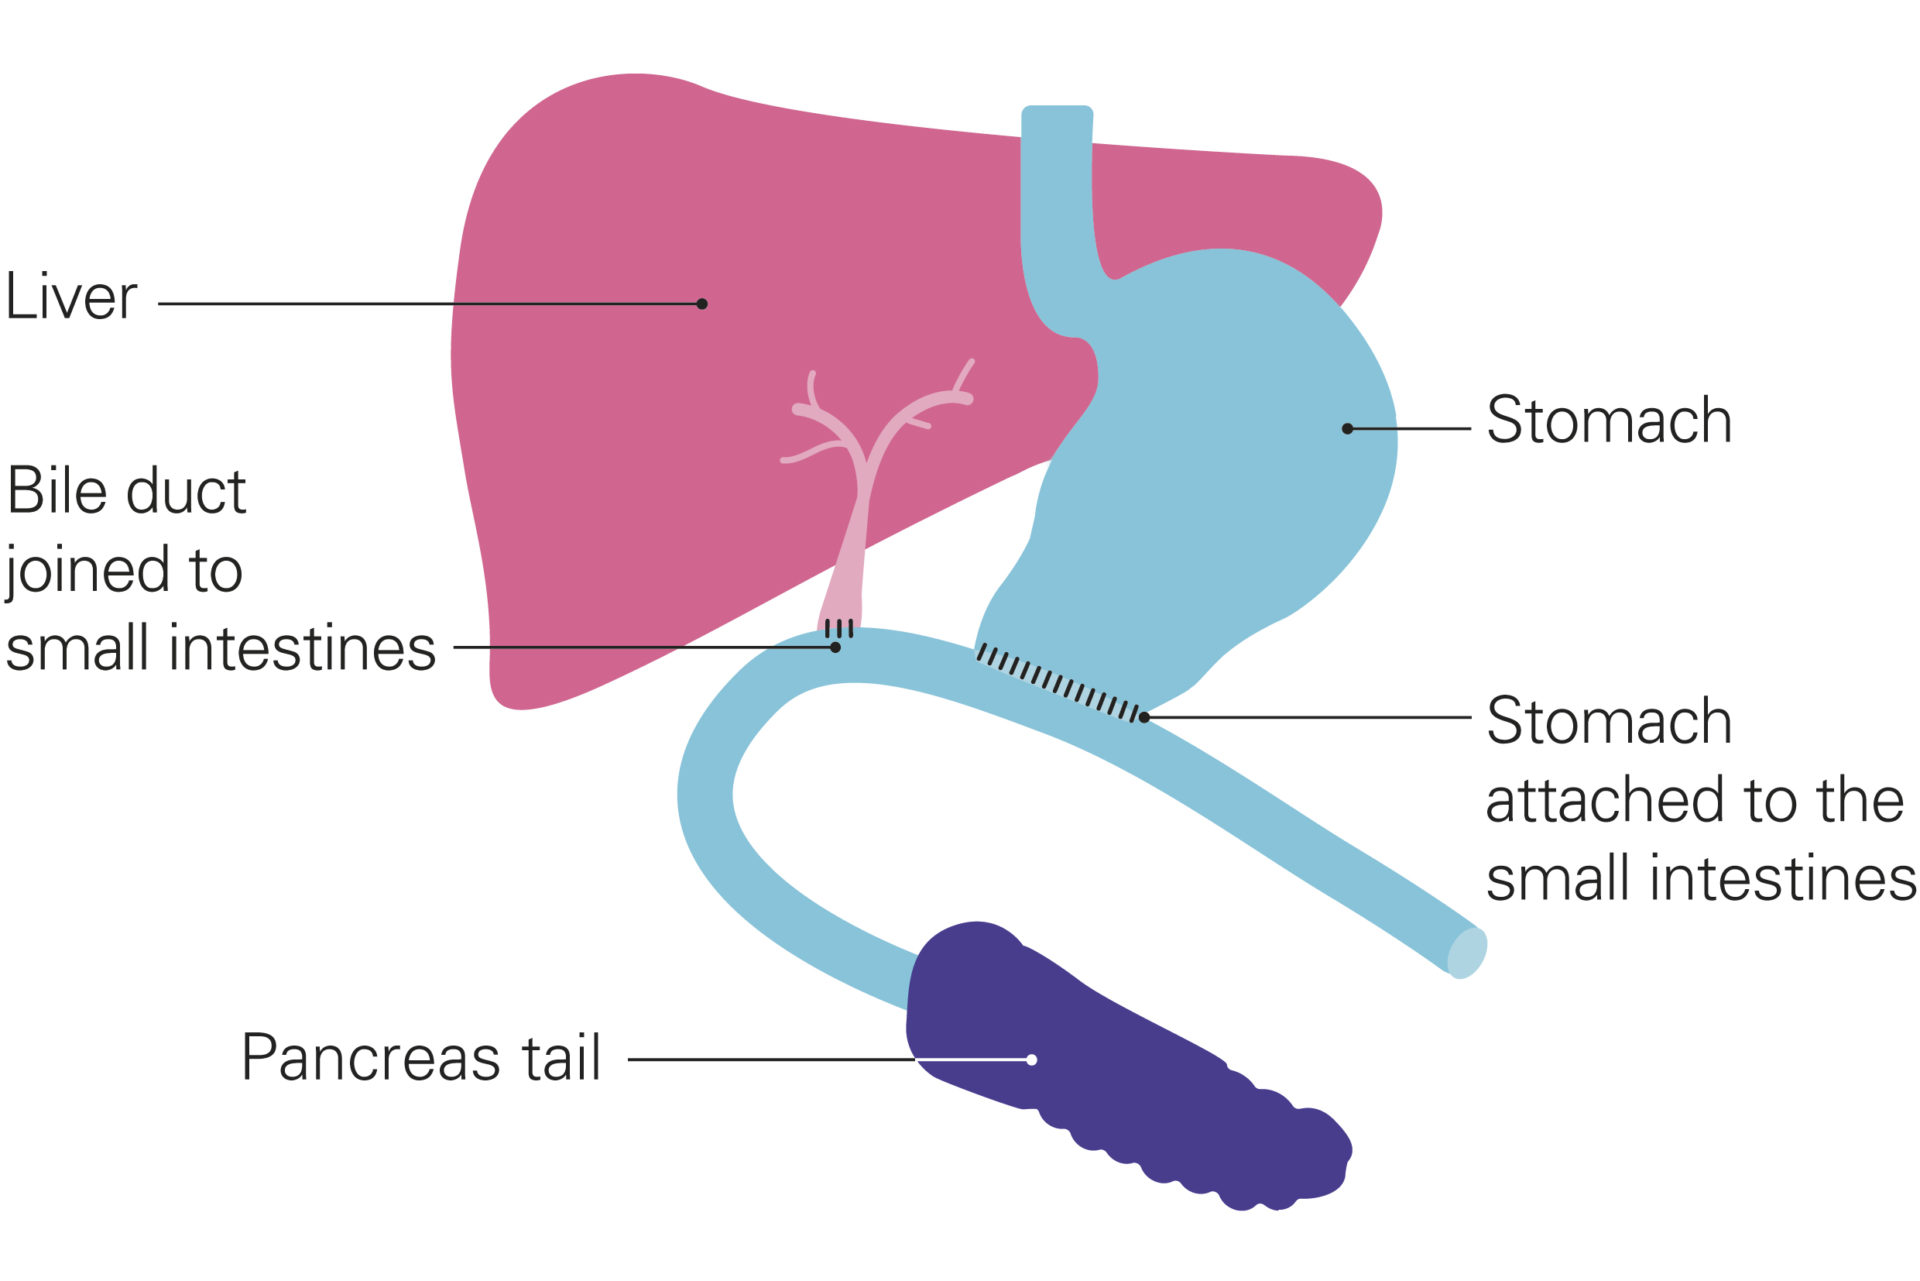 A diagram shows the parts of the body after a Whipple’s. The liver and bile duct are on the left, coloured in shades of pink. The bile duct now connects directly to the small intestines, shown in light blue, which in turn connect to the pancreas tail (dark purple). The stomach also now connects directly to the small intestines. Stitches re shown at the joins. Other organs have been removed. 